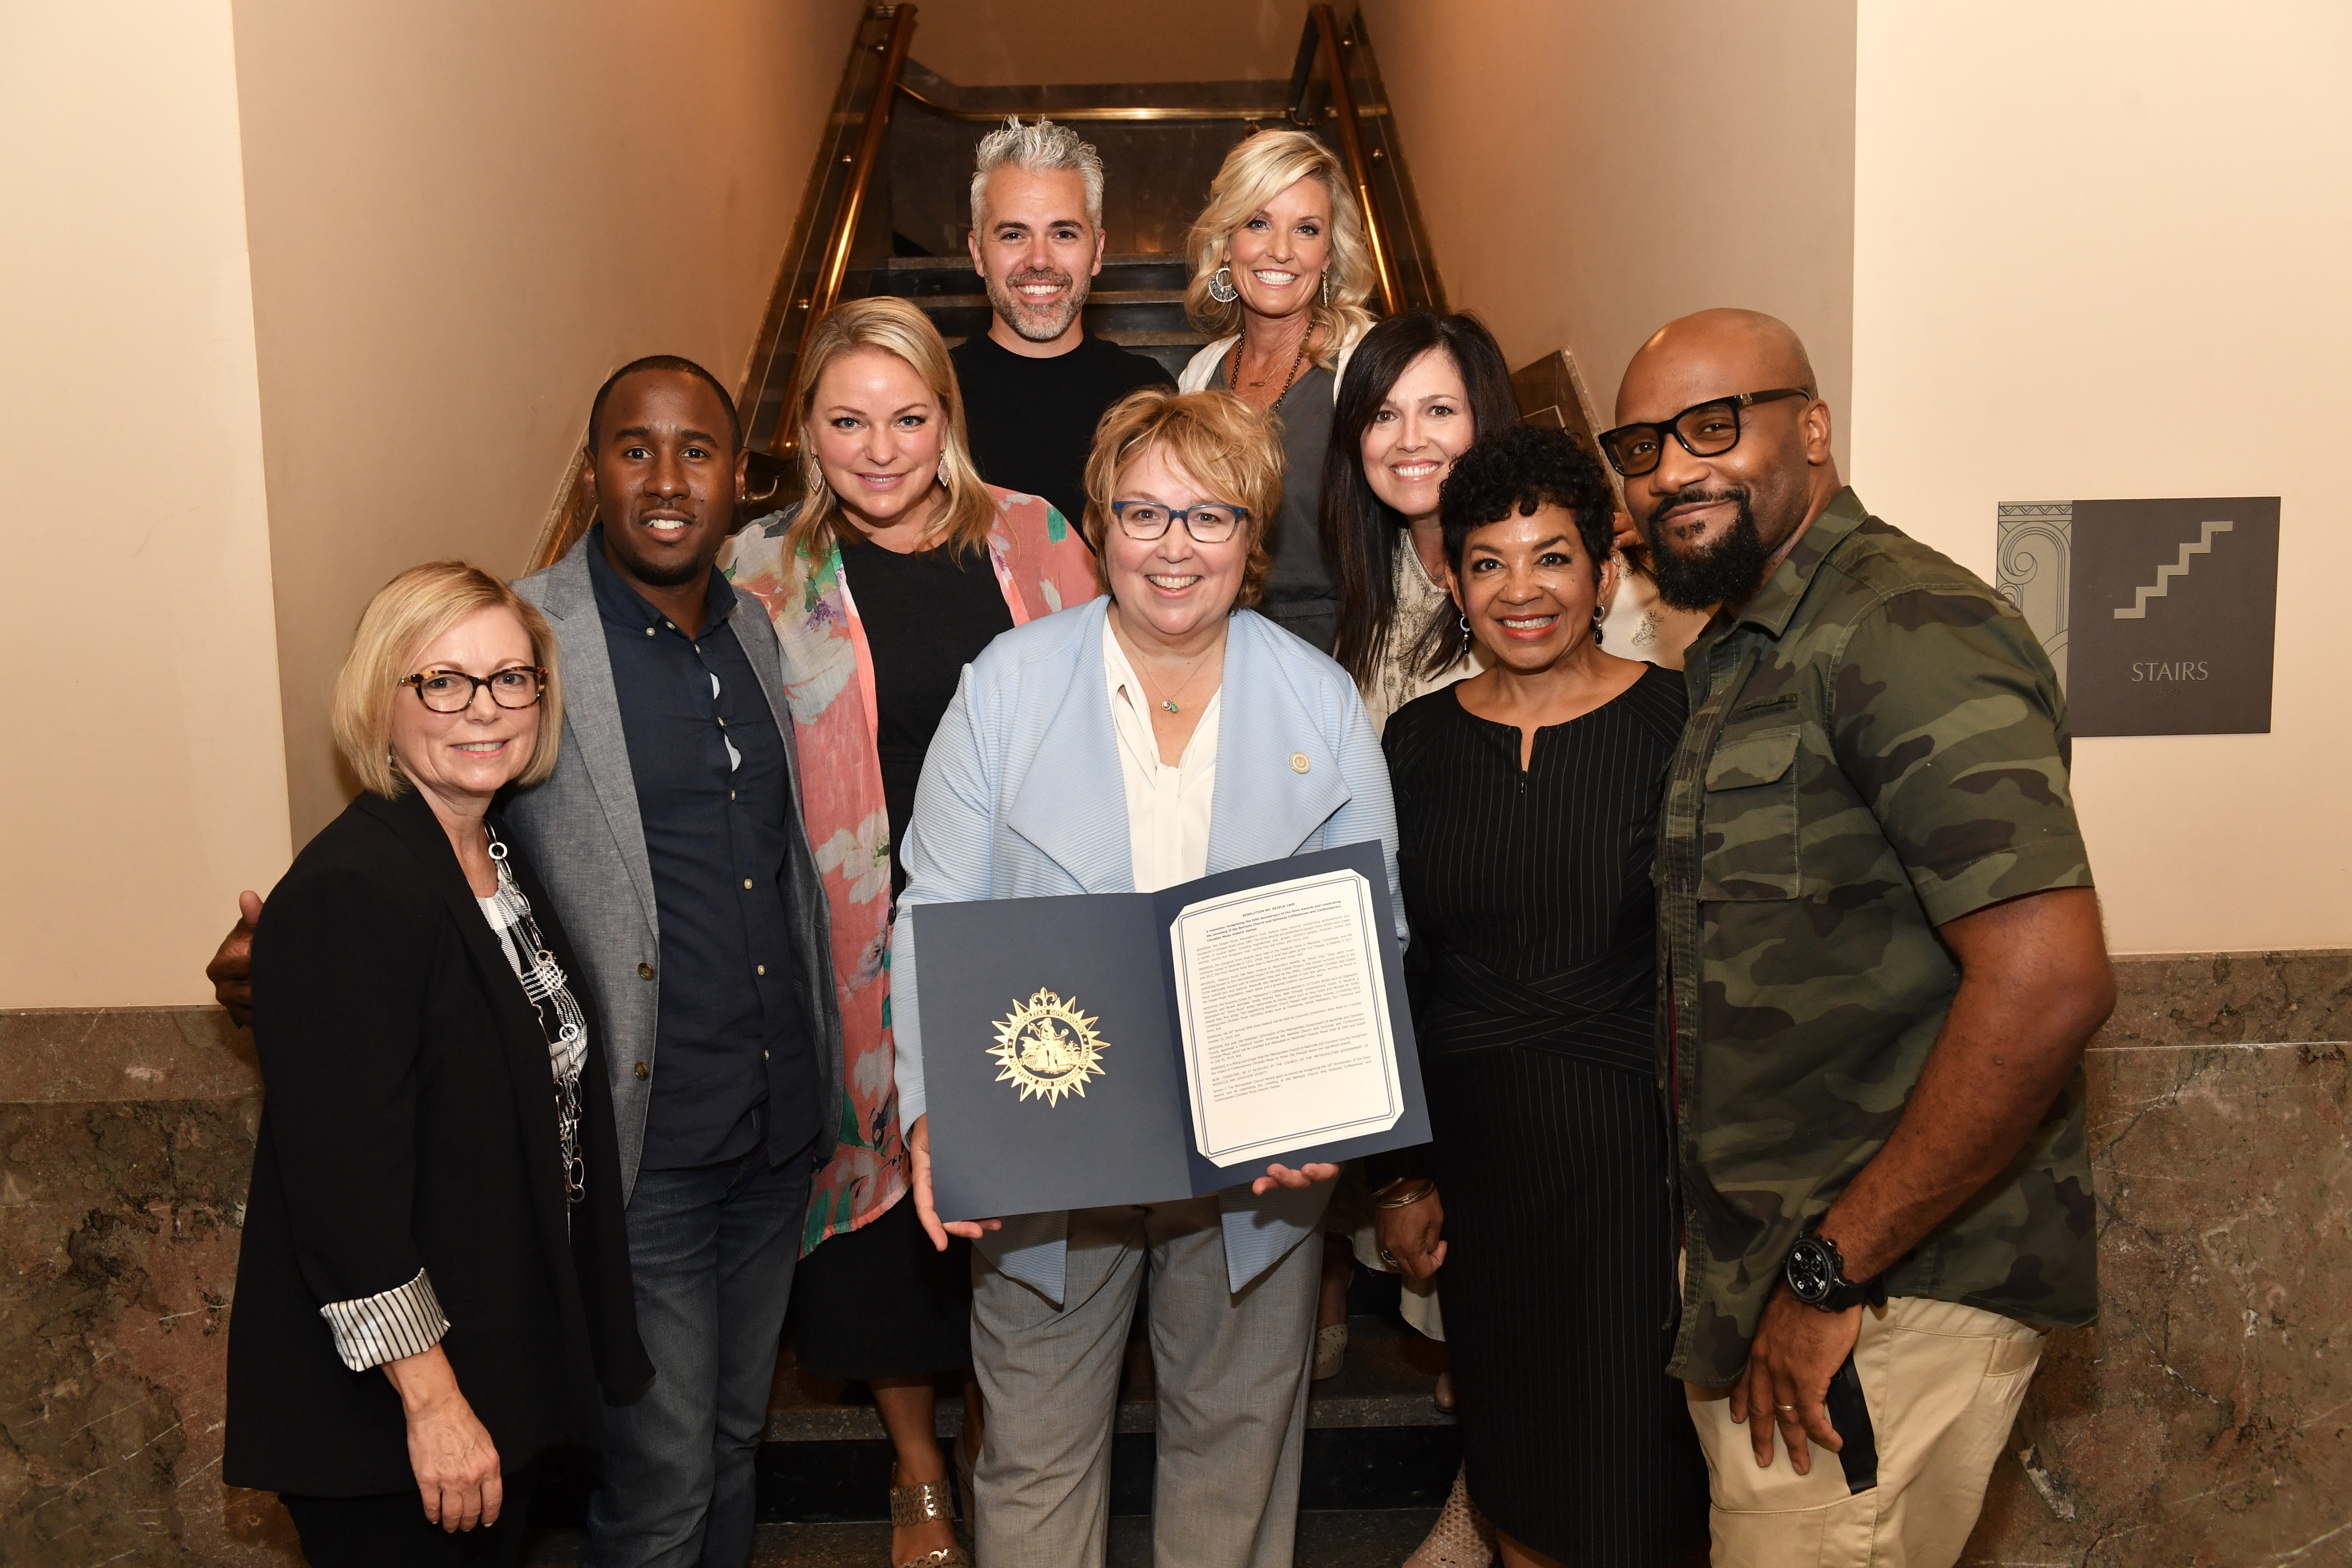 Nashville Metro Historical Commission, Metro Council, Gospel Music Association, and Record Labels pose with Resolution